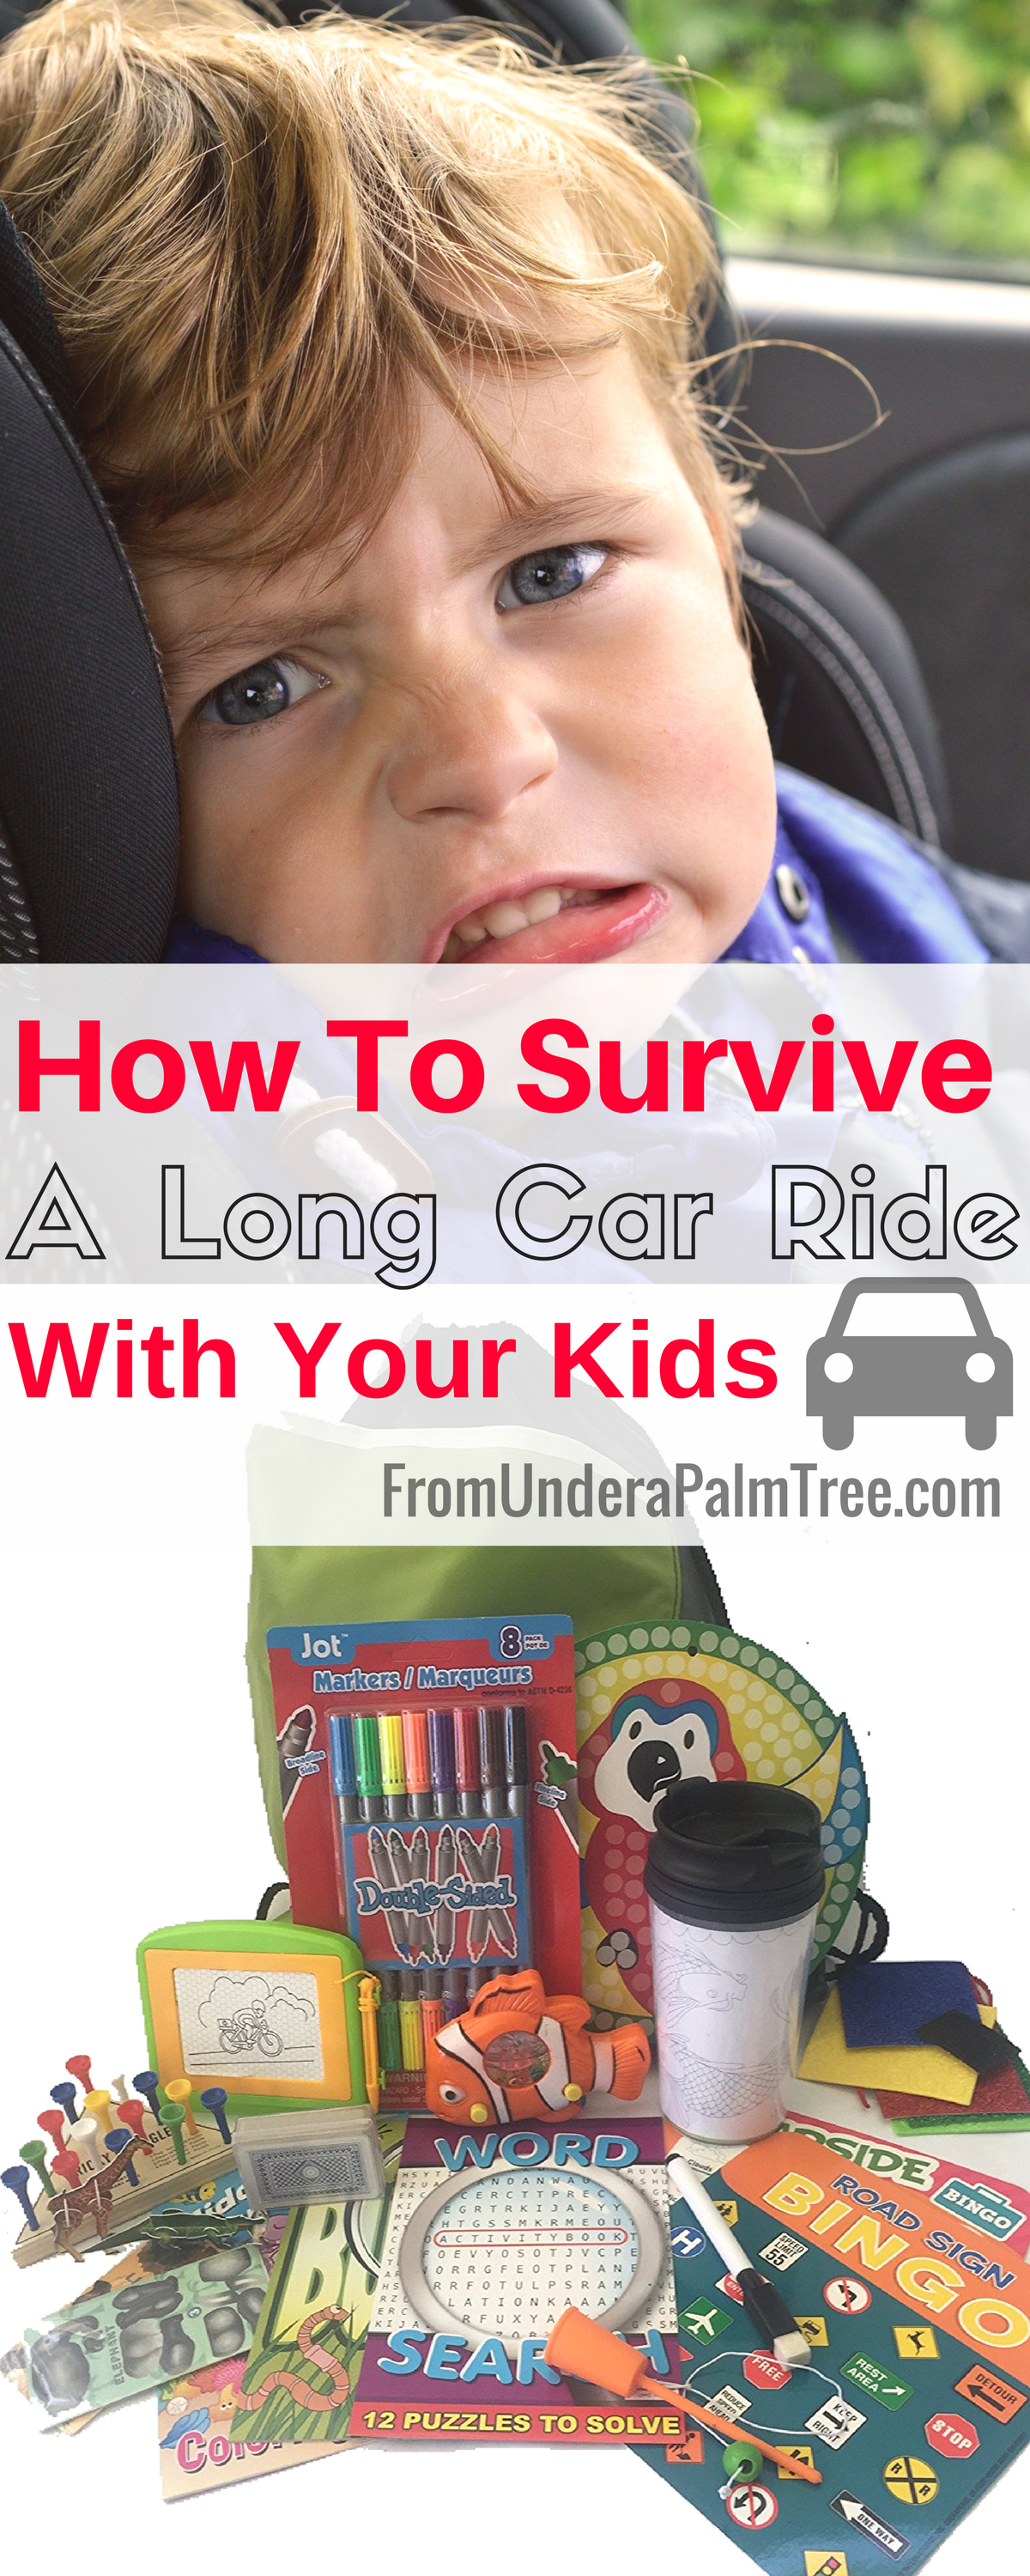 How to Survive a Long Car Ride with Your Kids | Traveling with kids | Traveling with Toddlers | Kids Travel Activities | Car rides with Kids | Road trip with kids | family road trip | car travel | kids activities | long car rides | family | games | kids travel games | kids | car | Travel | 